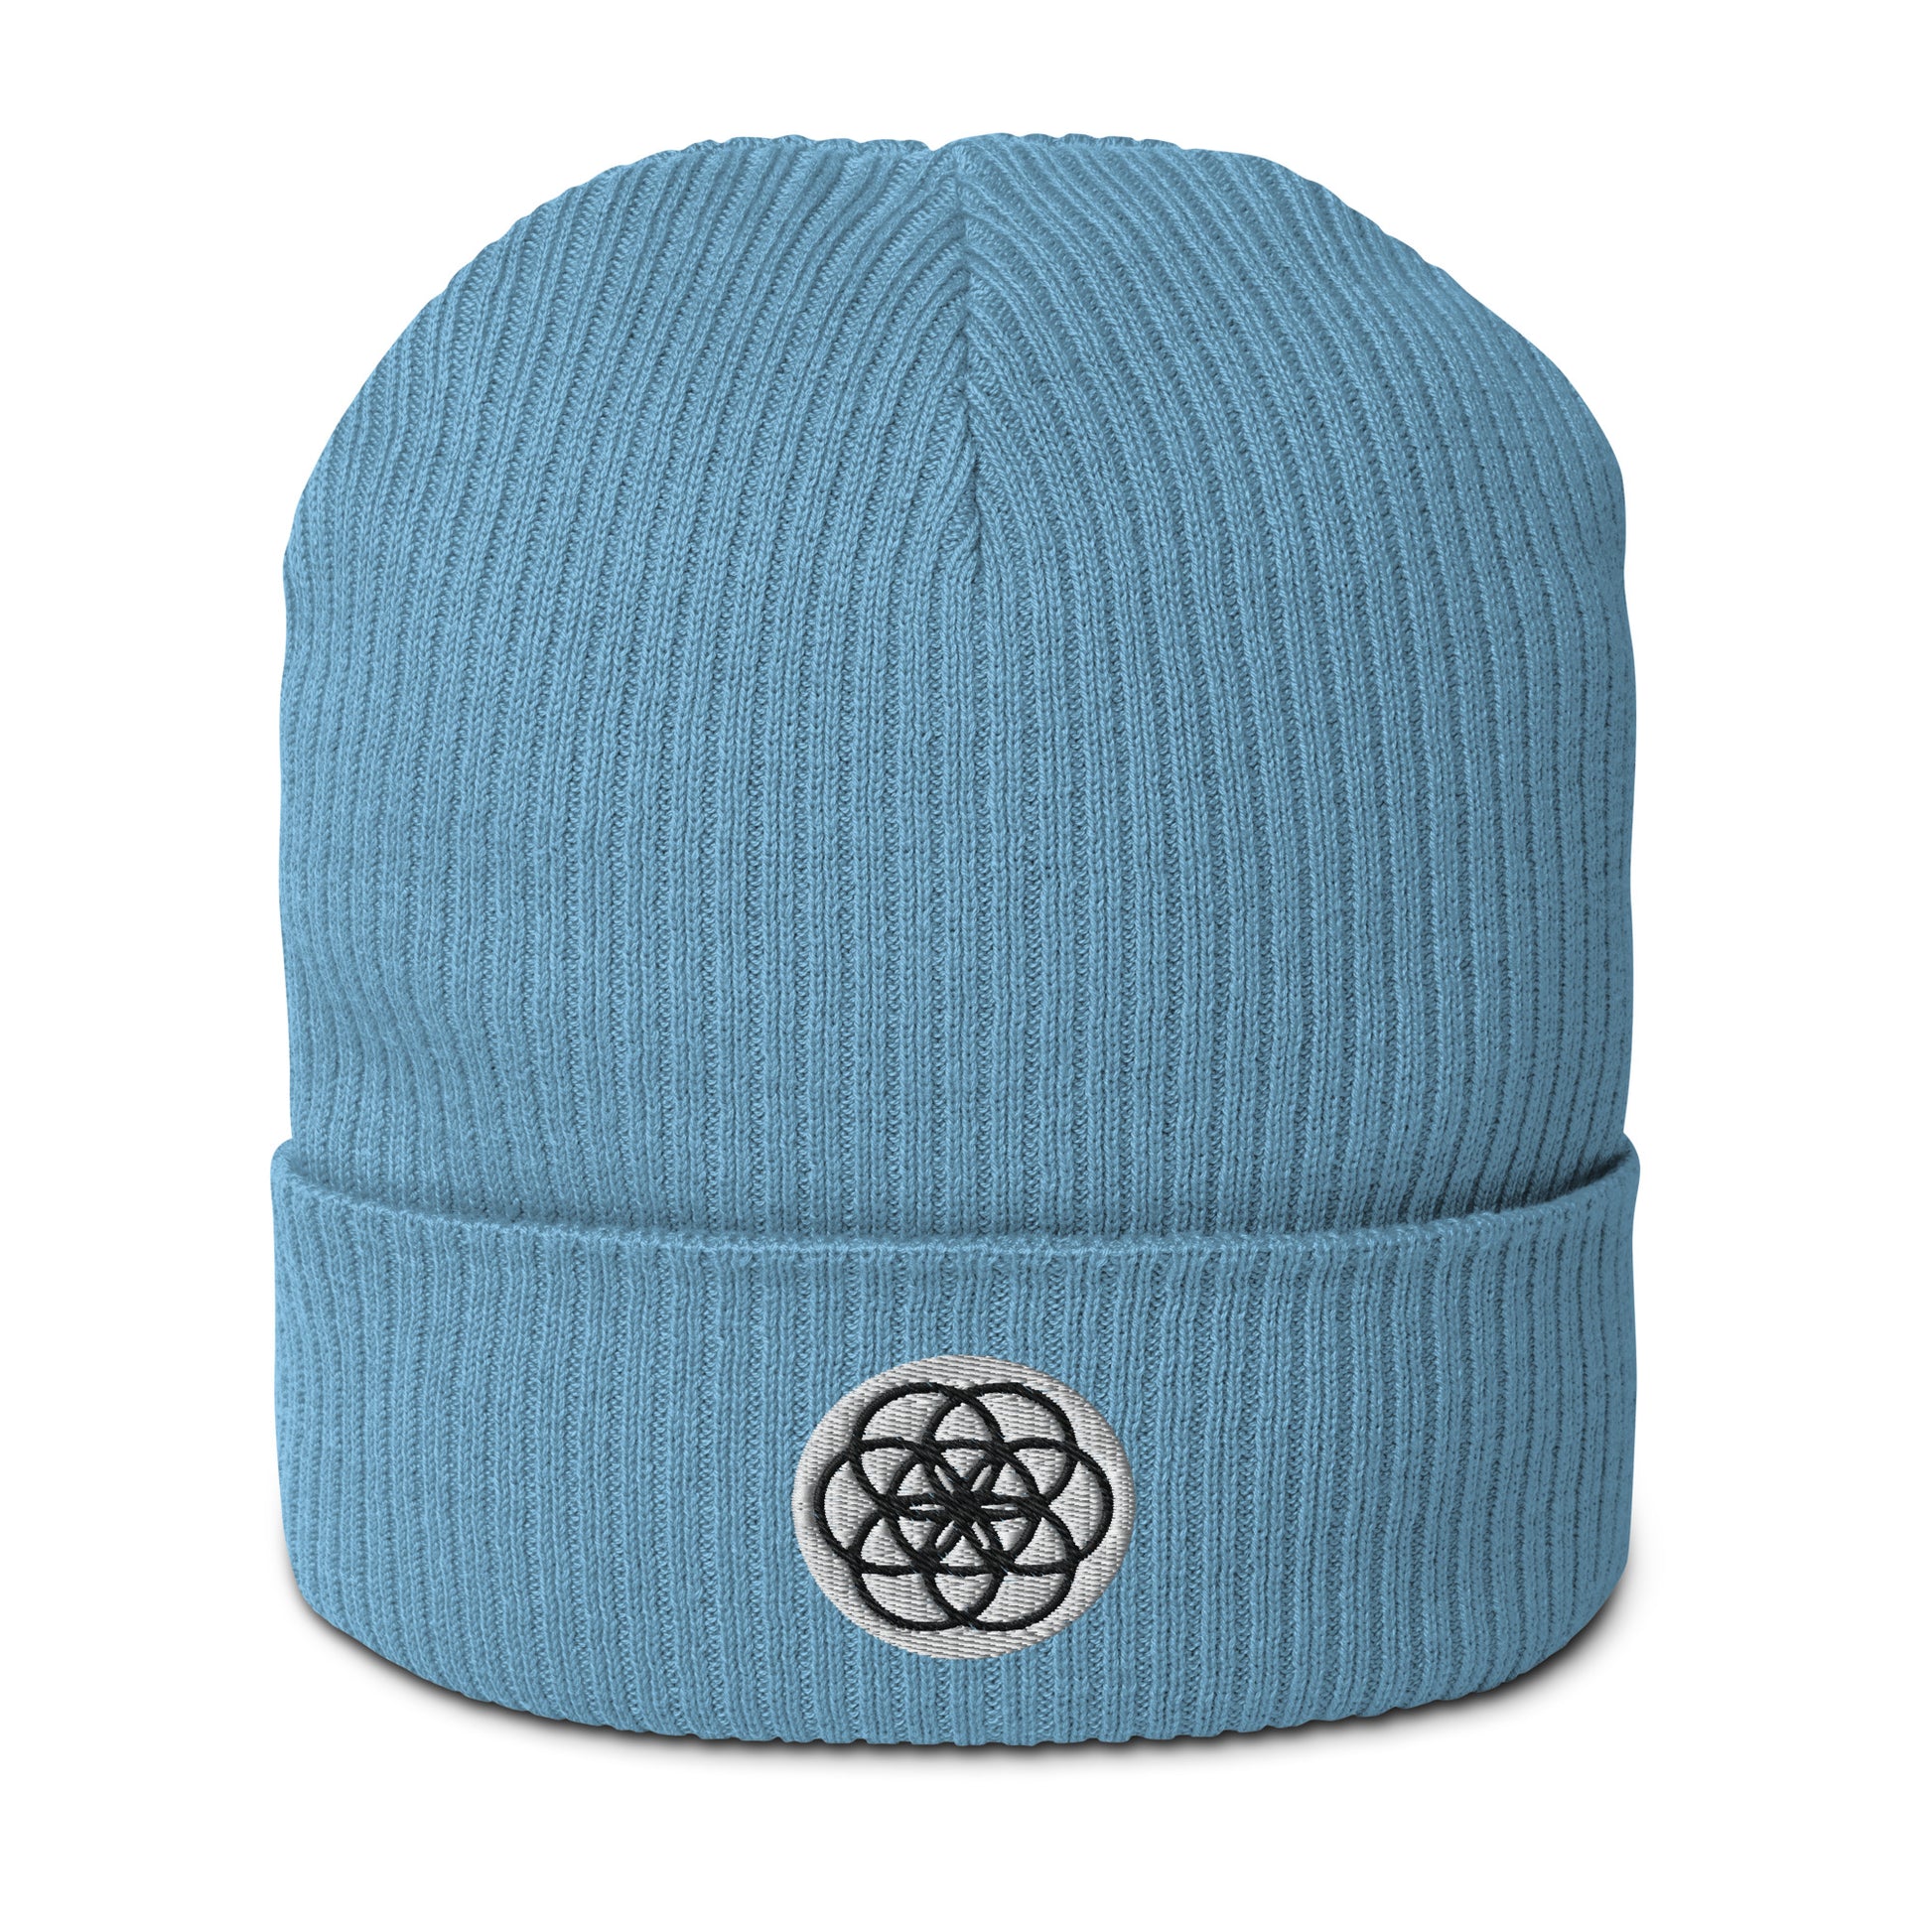 The Seed of Life beanie in Bermuda Blue is made from 100% organic cotton and it’s the perfect cozy addition to your energetically elevated wardrobe. The seed of life is an ancient and meaningful sacred geometry symbol that Whether you're stargazing or navigating the urban jungle, let this beanie remind you of your place in the cosmic tapestry.